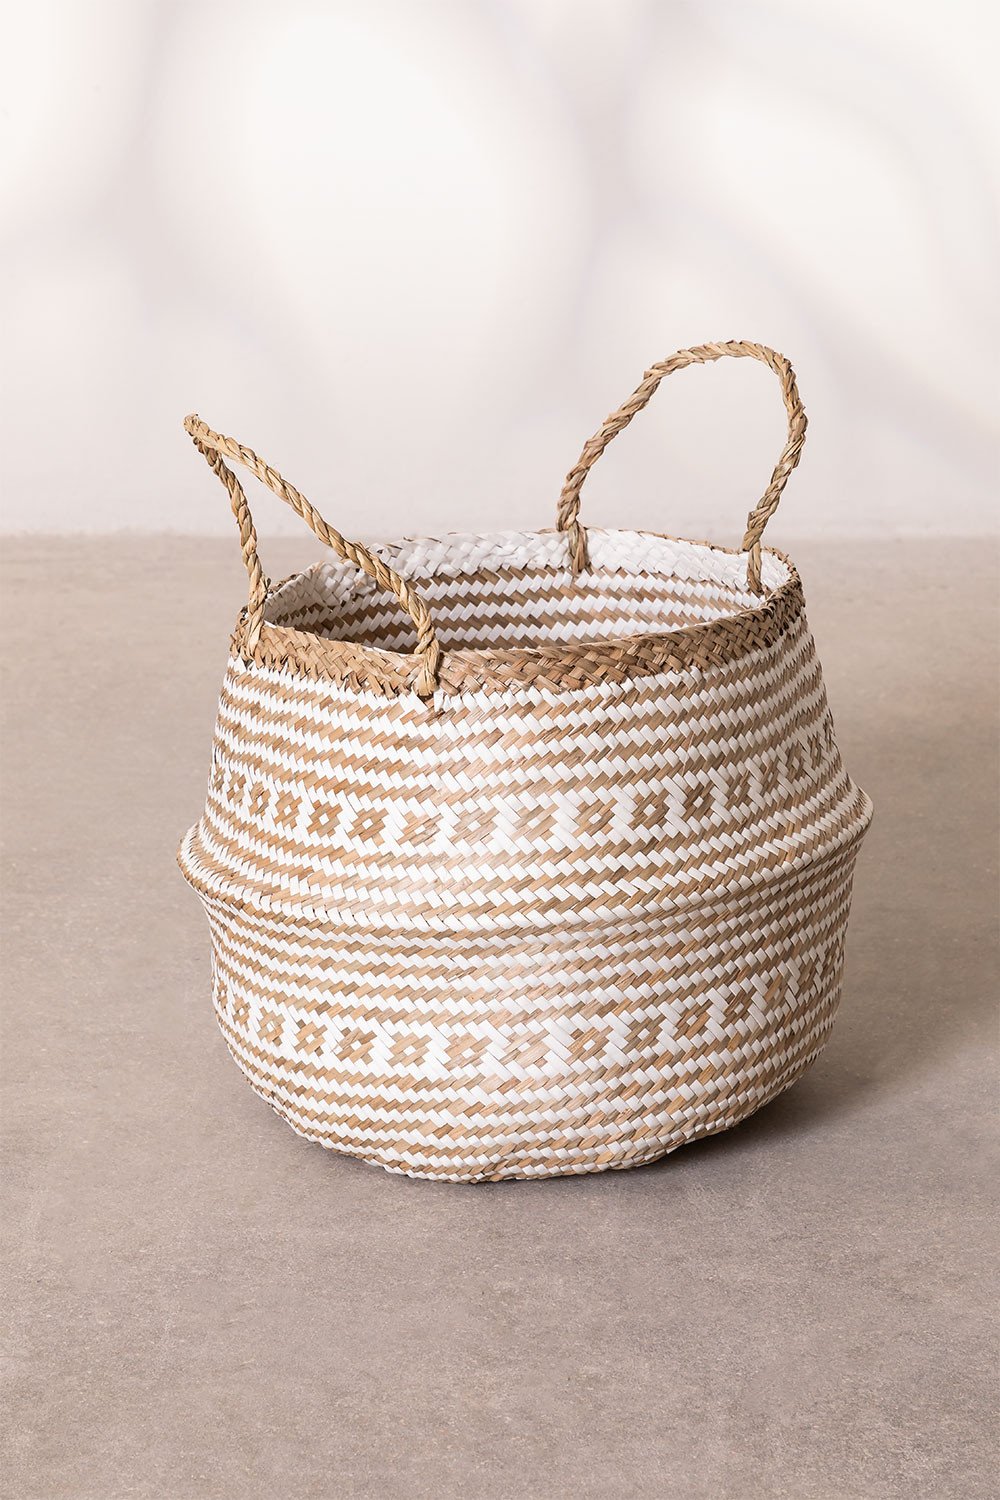 Handcrafted Basket Kahs Osaic, gallery image 1